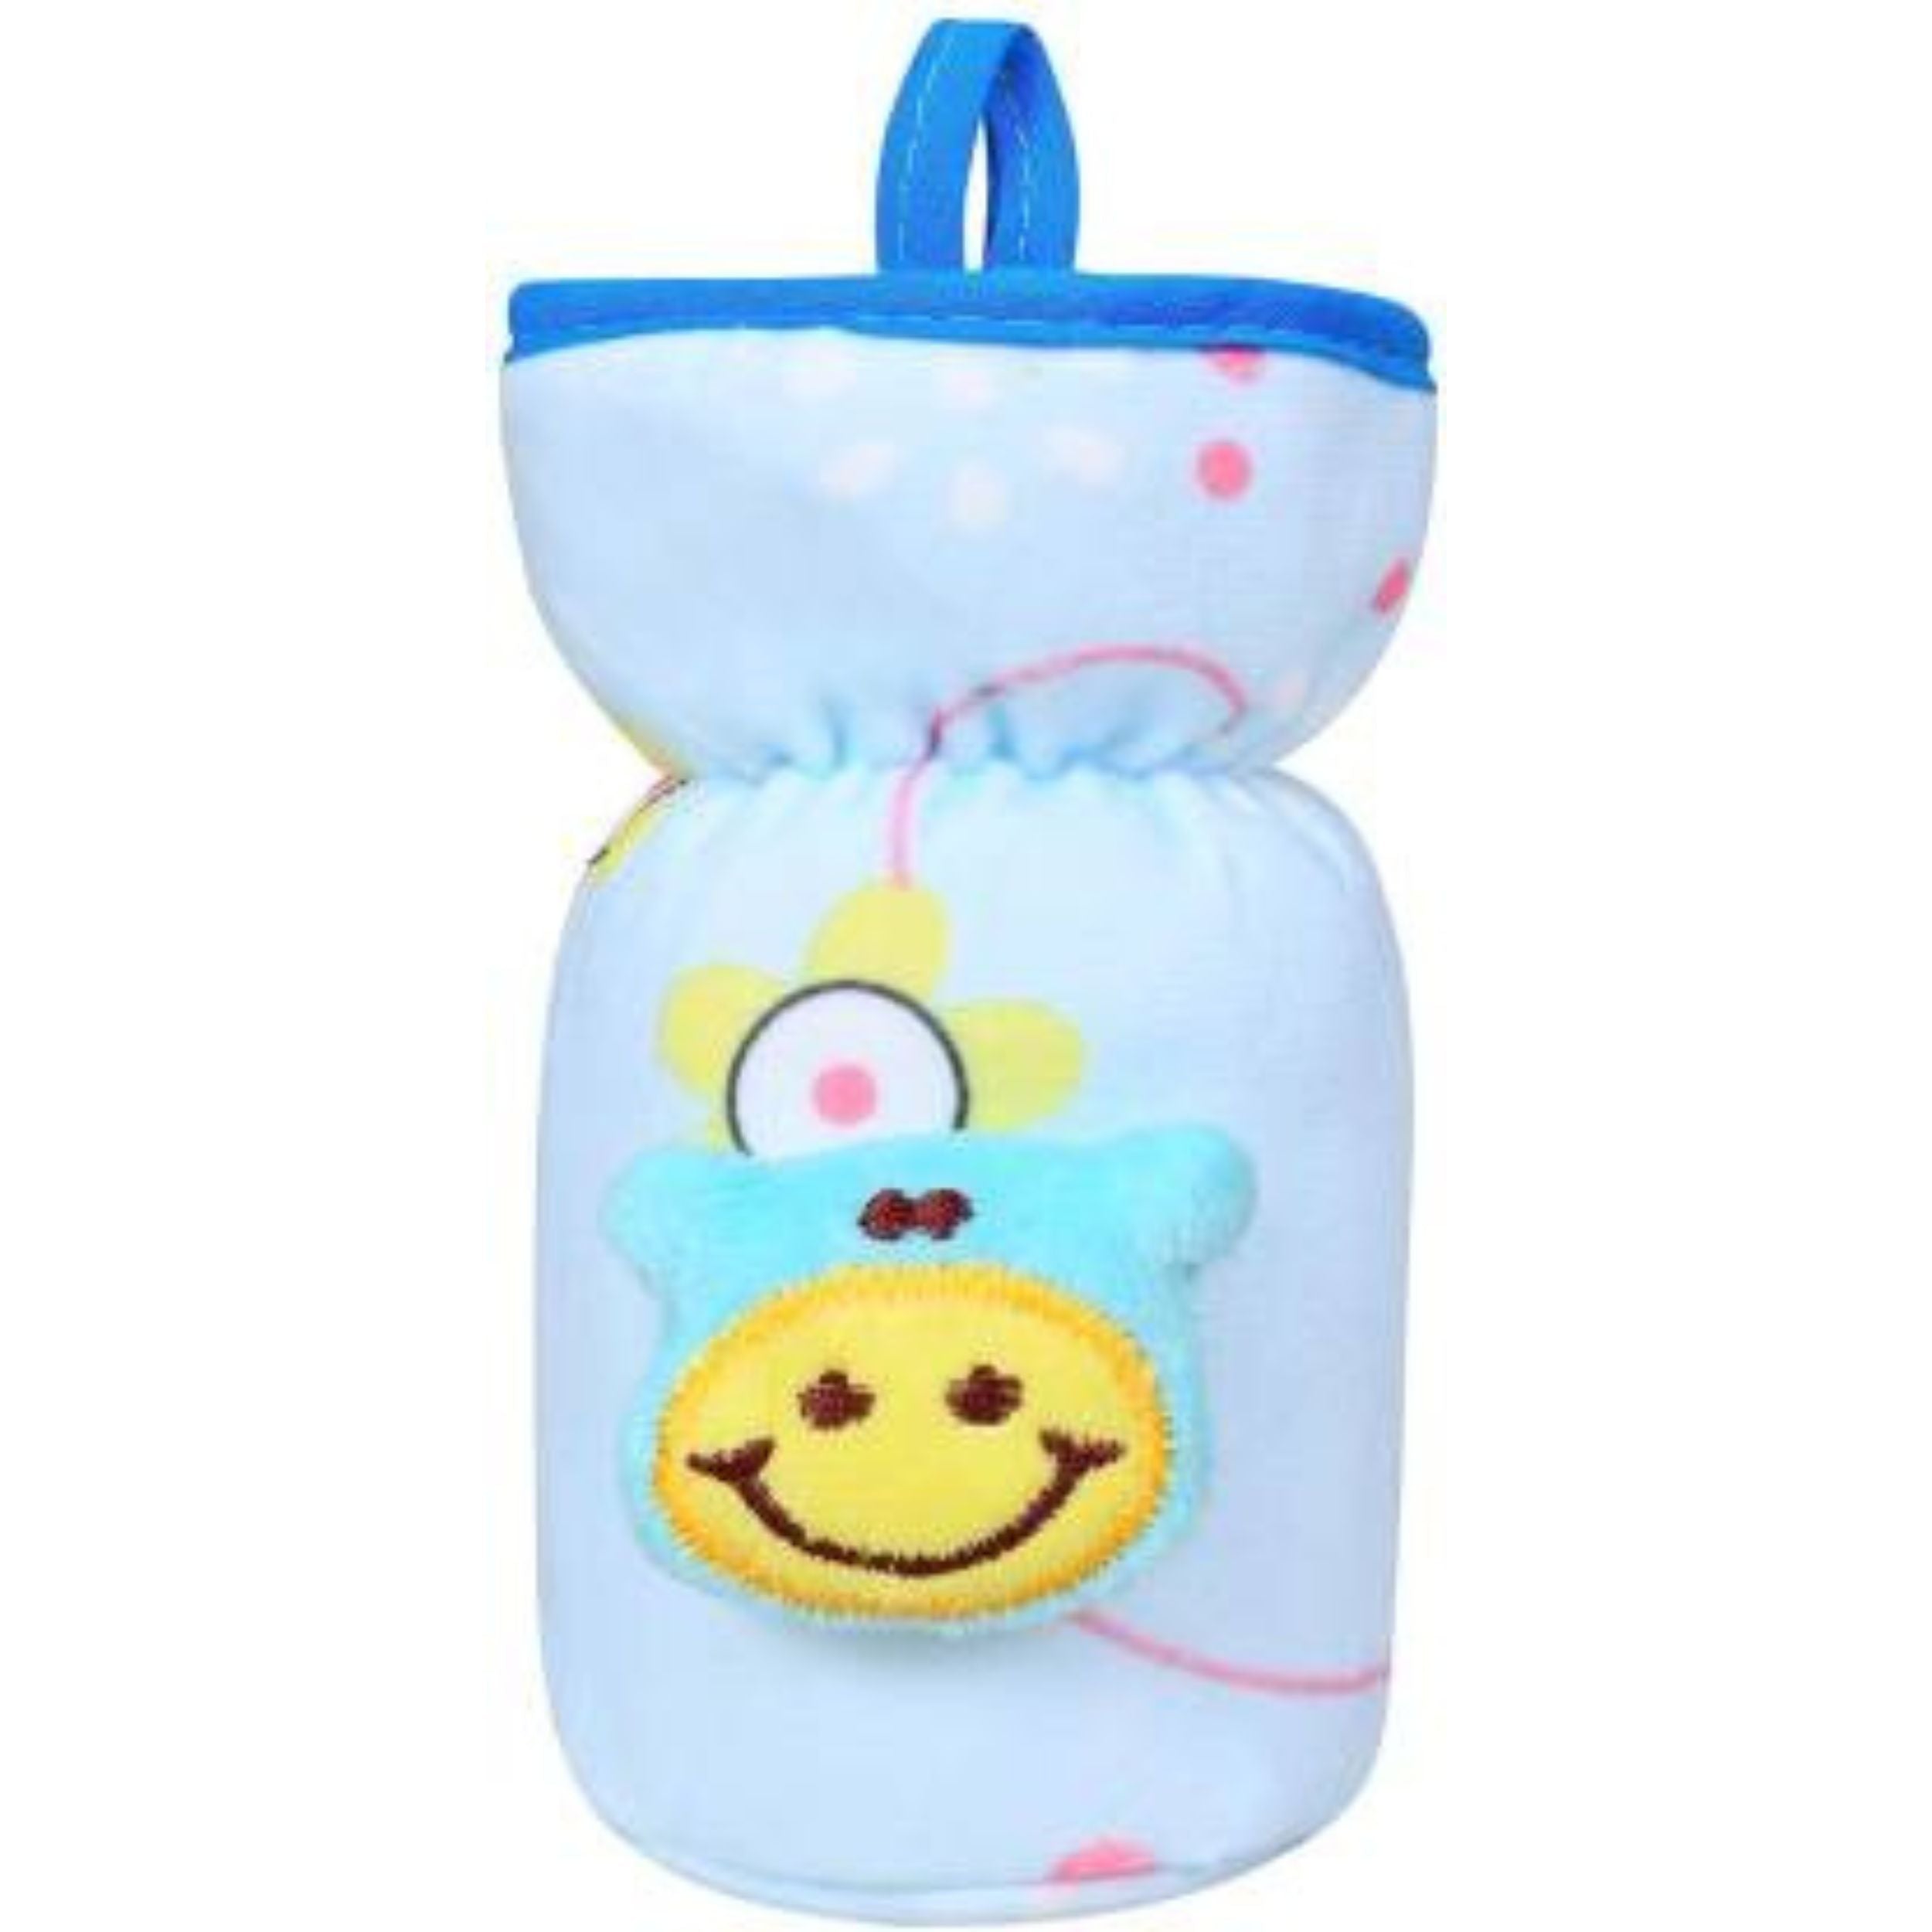 Baby Feeding Bottle Cover with Easy to Hold Strap